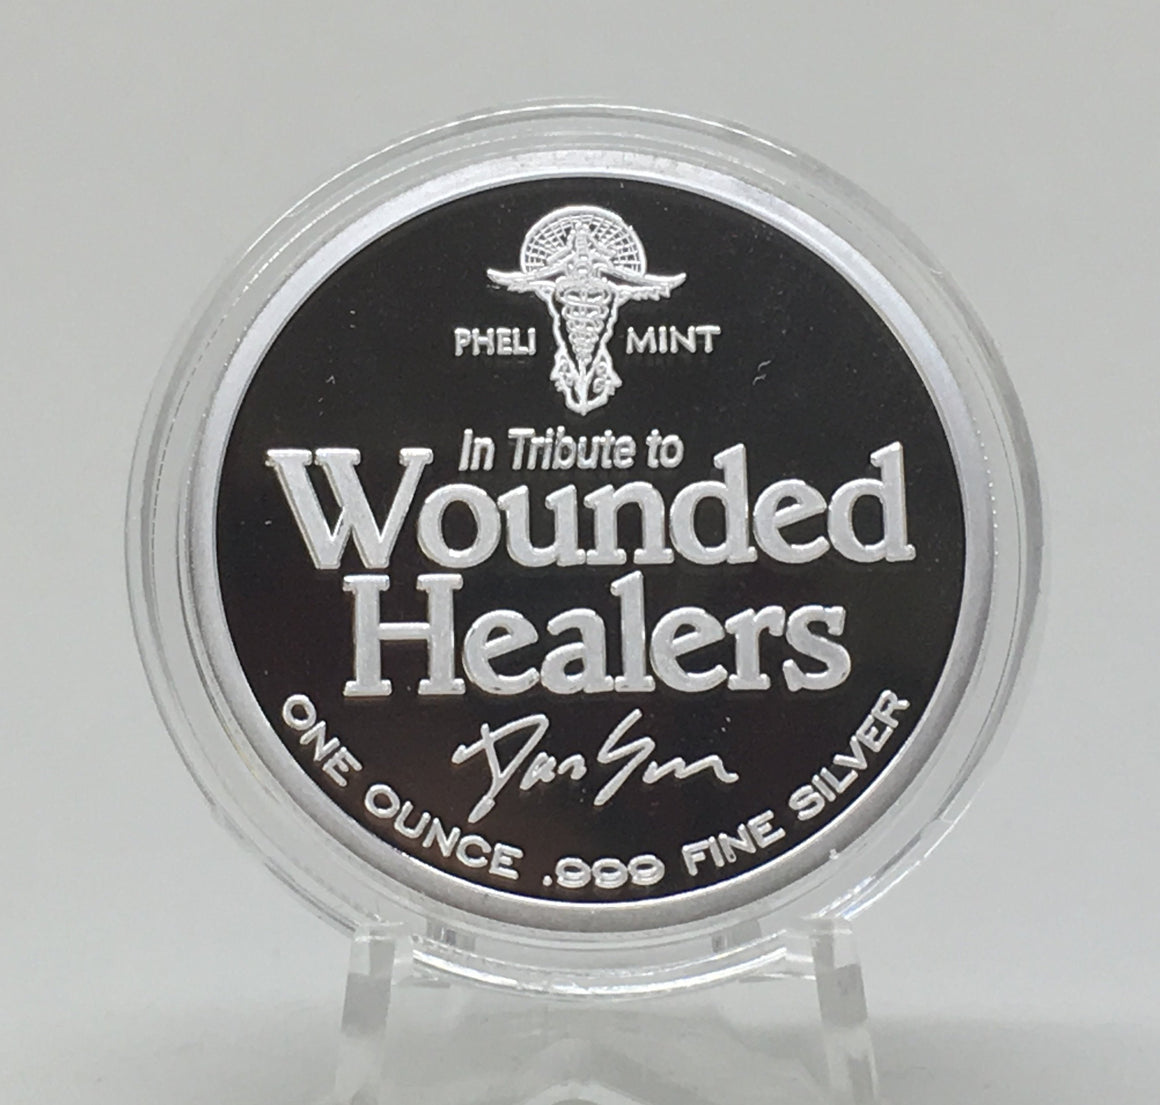 You Are Not Alone - Wounded Healers, 1oz .999 Fine Silver Round by Pheli Mint